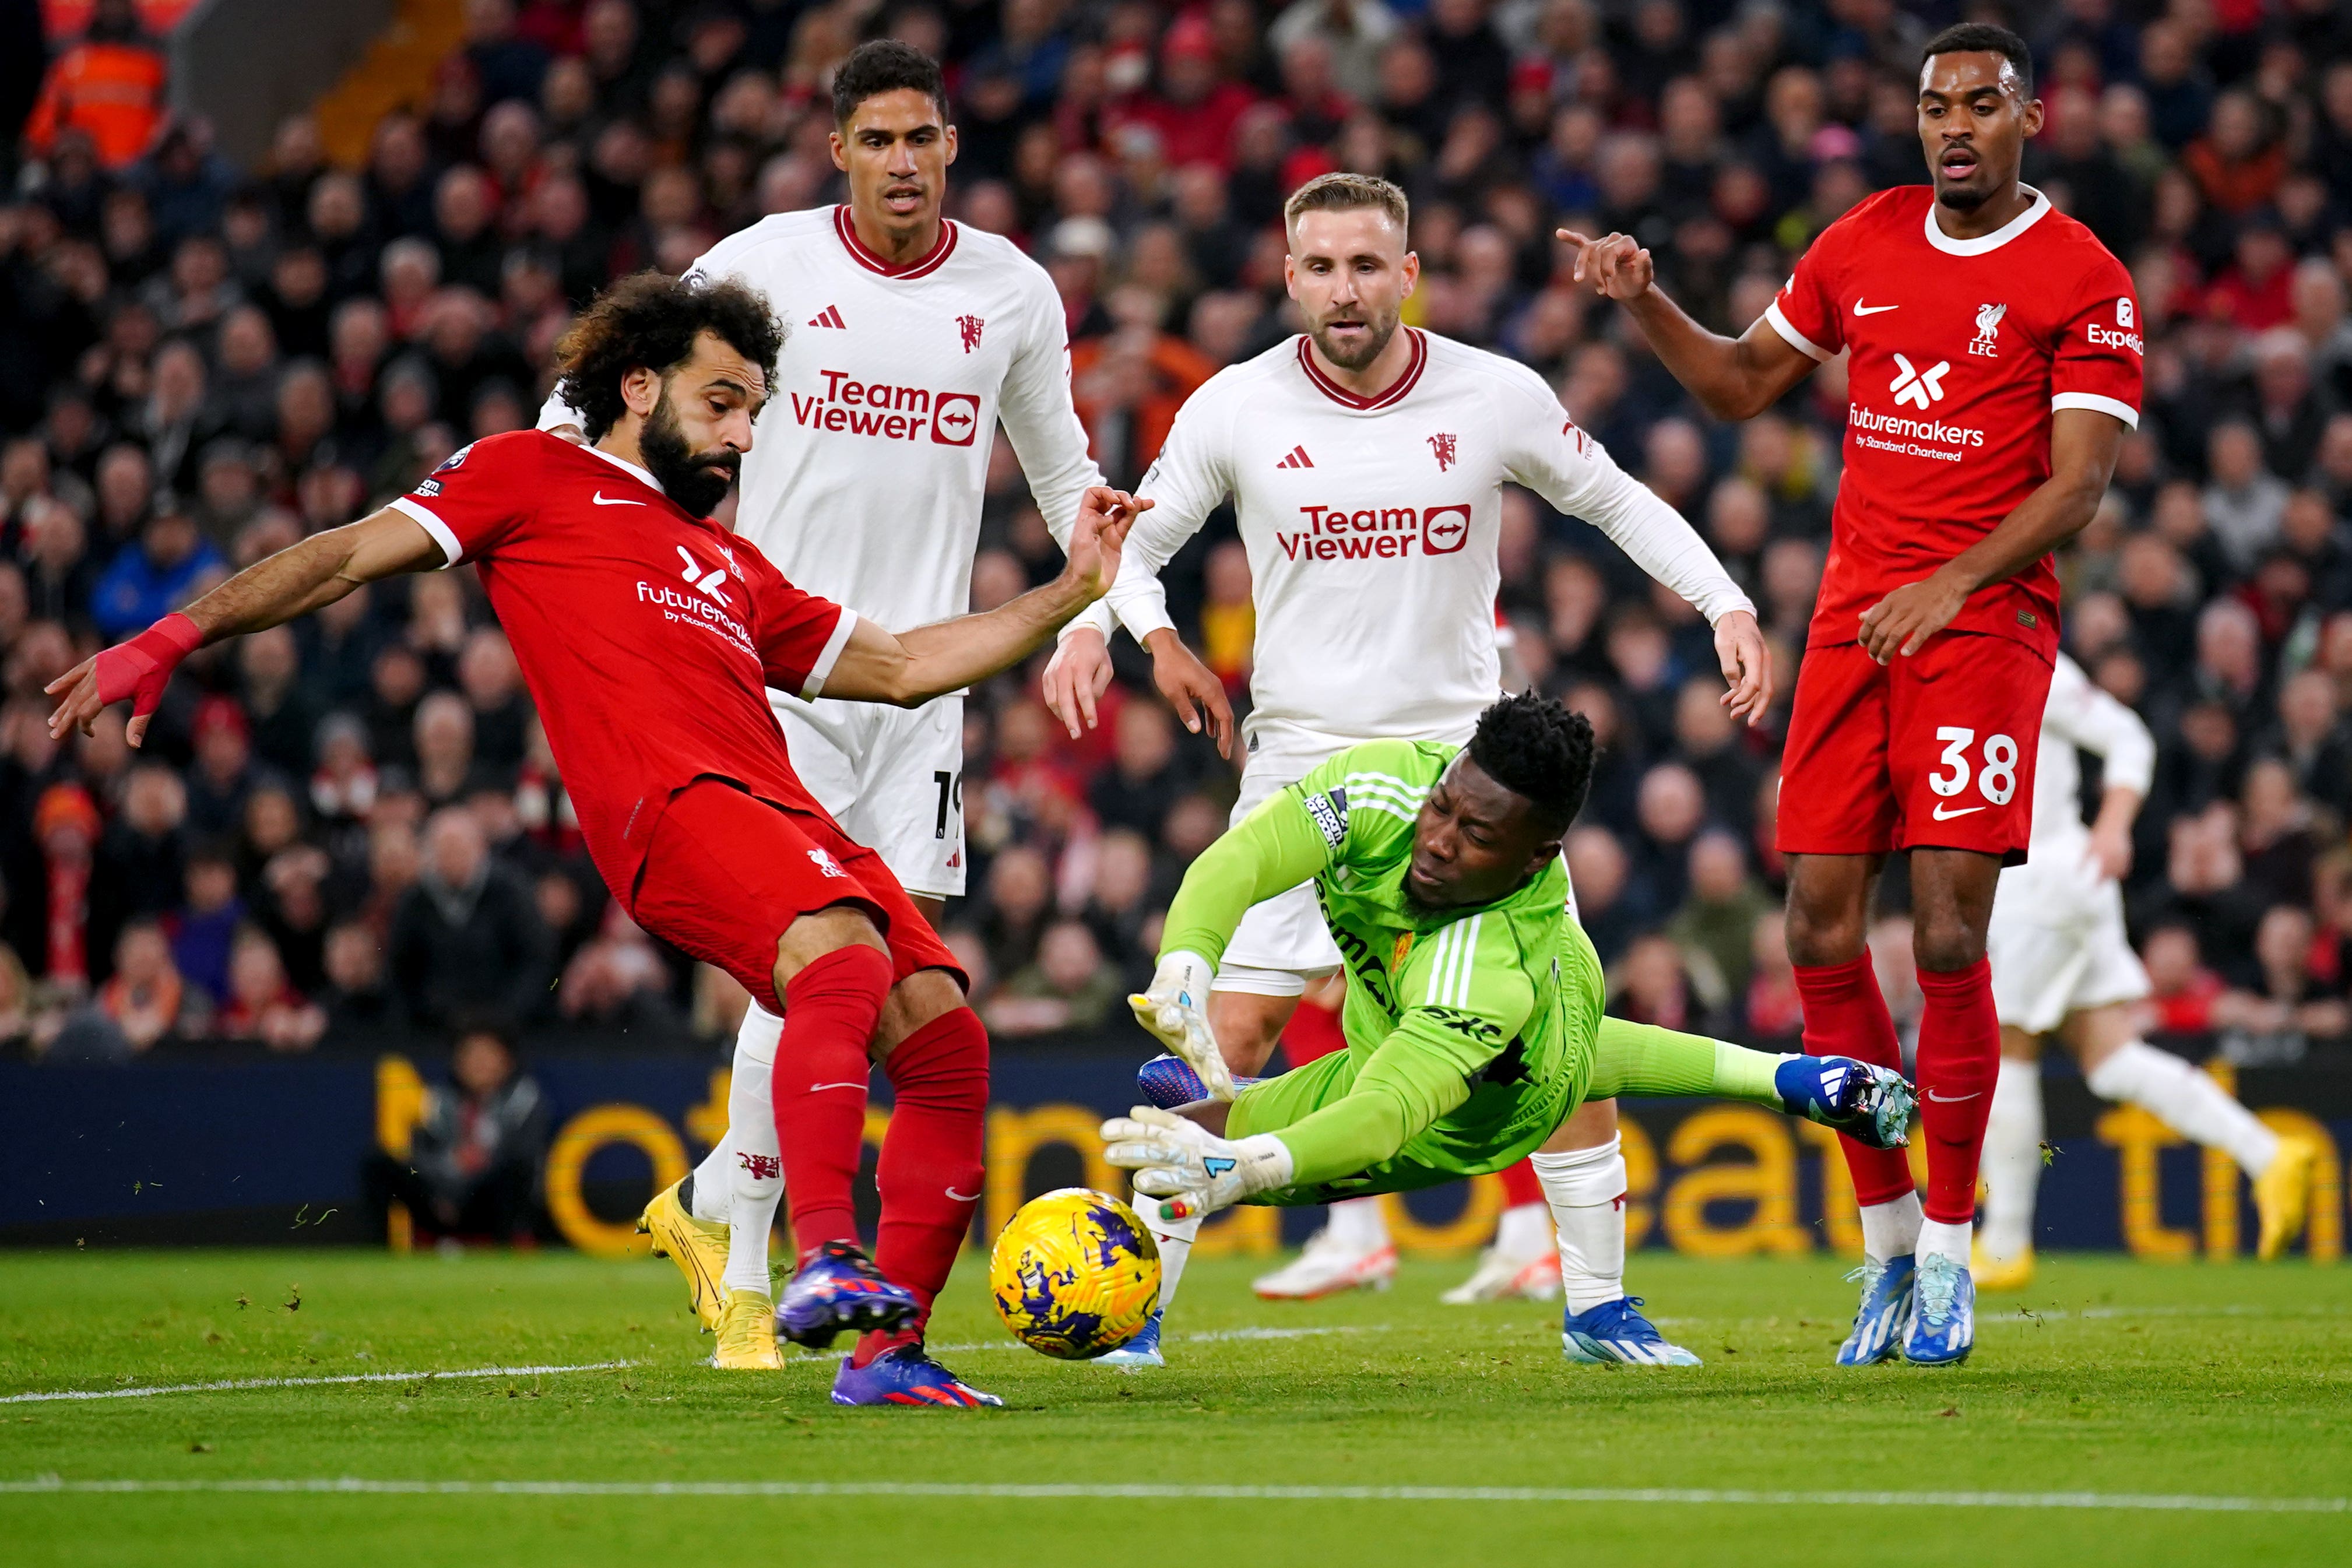 Liverpool were held to a goalless draw by Manchester United at Anfield earlier this season